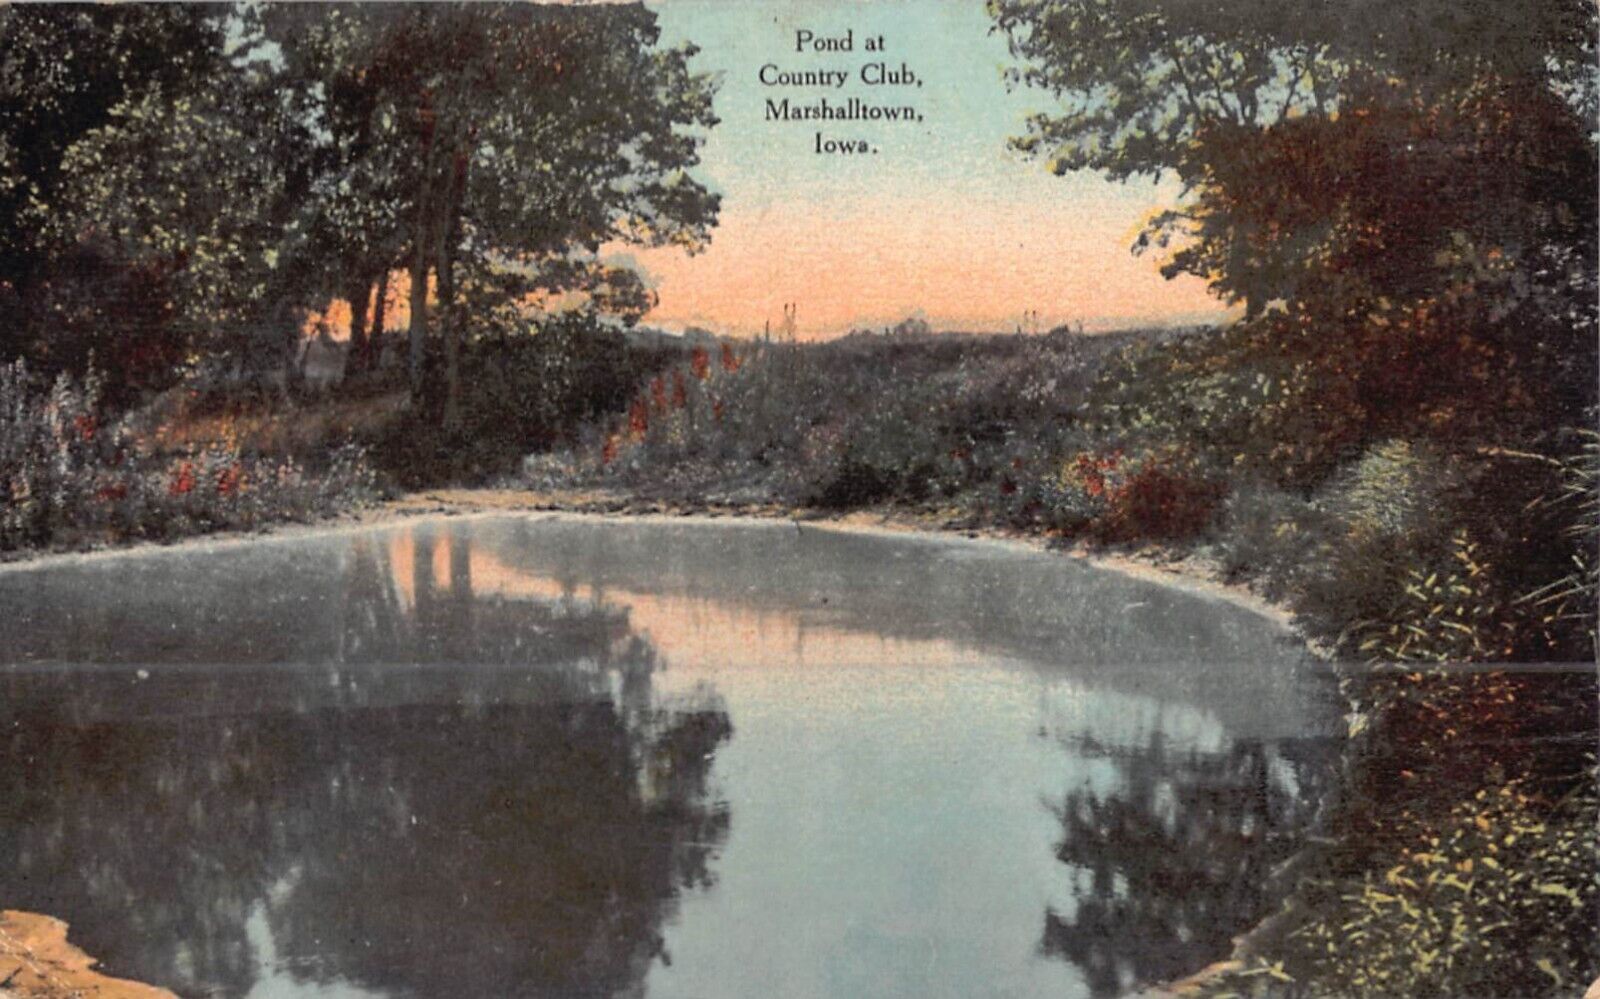 1917 Postcard of the Pond at the Country Club, Marshalltown, Iowa